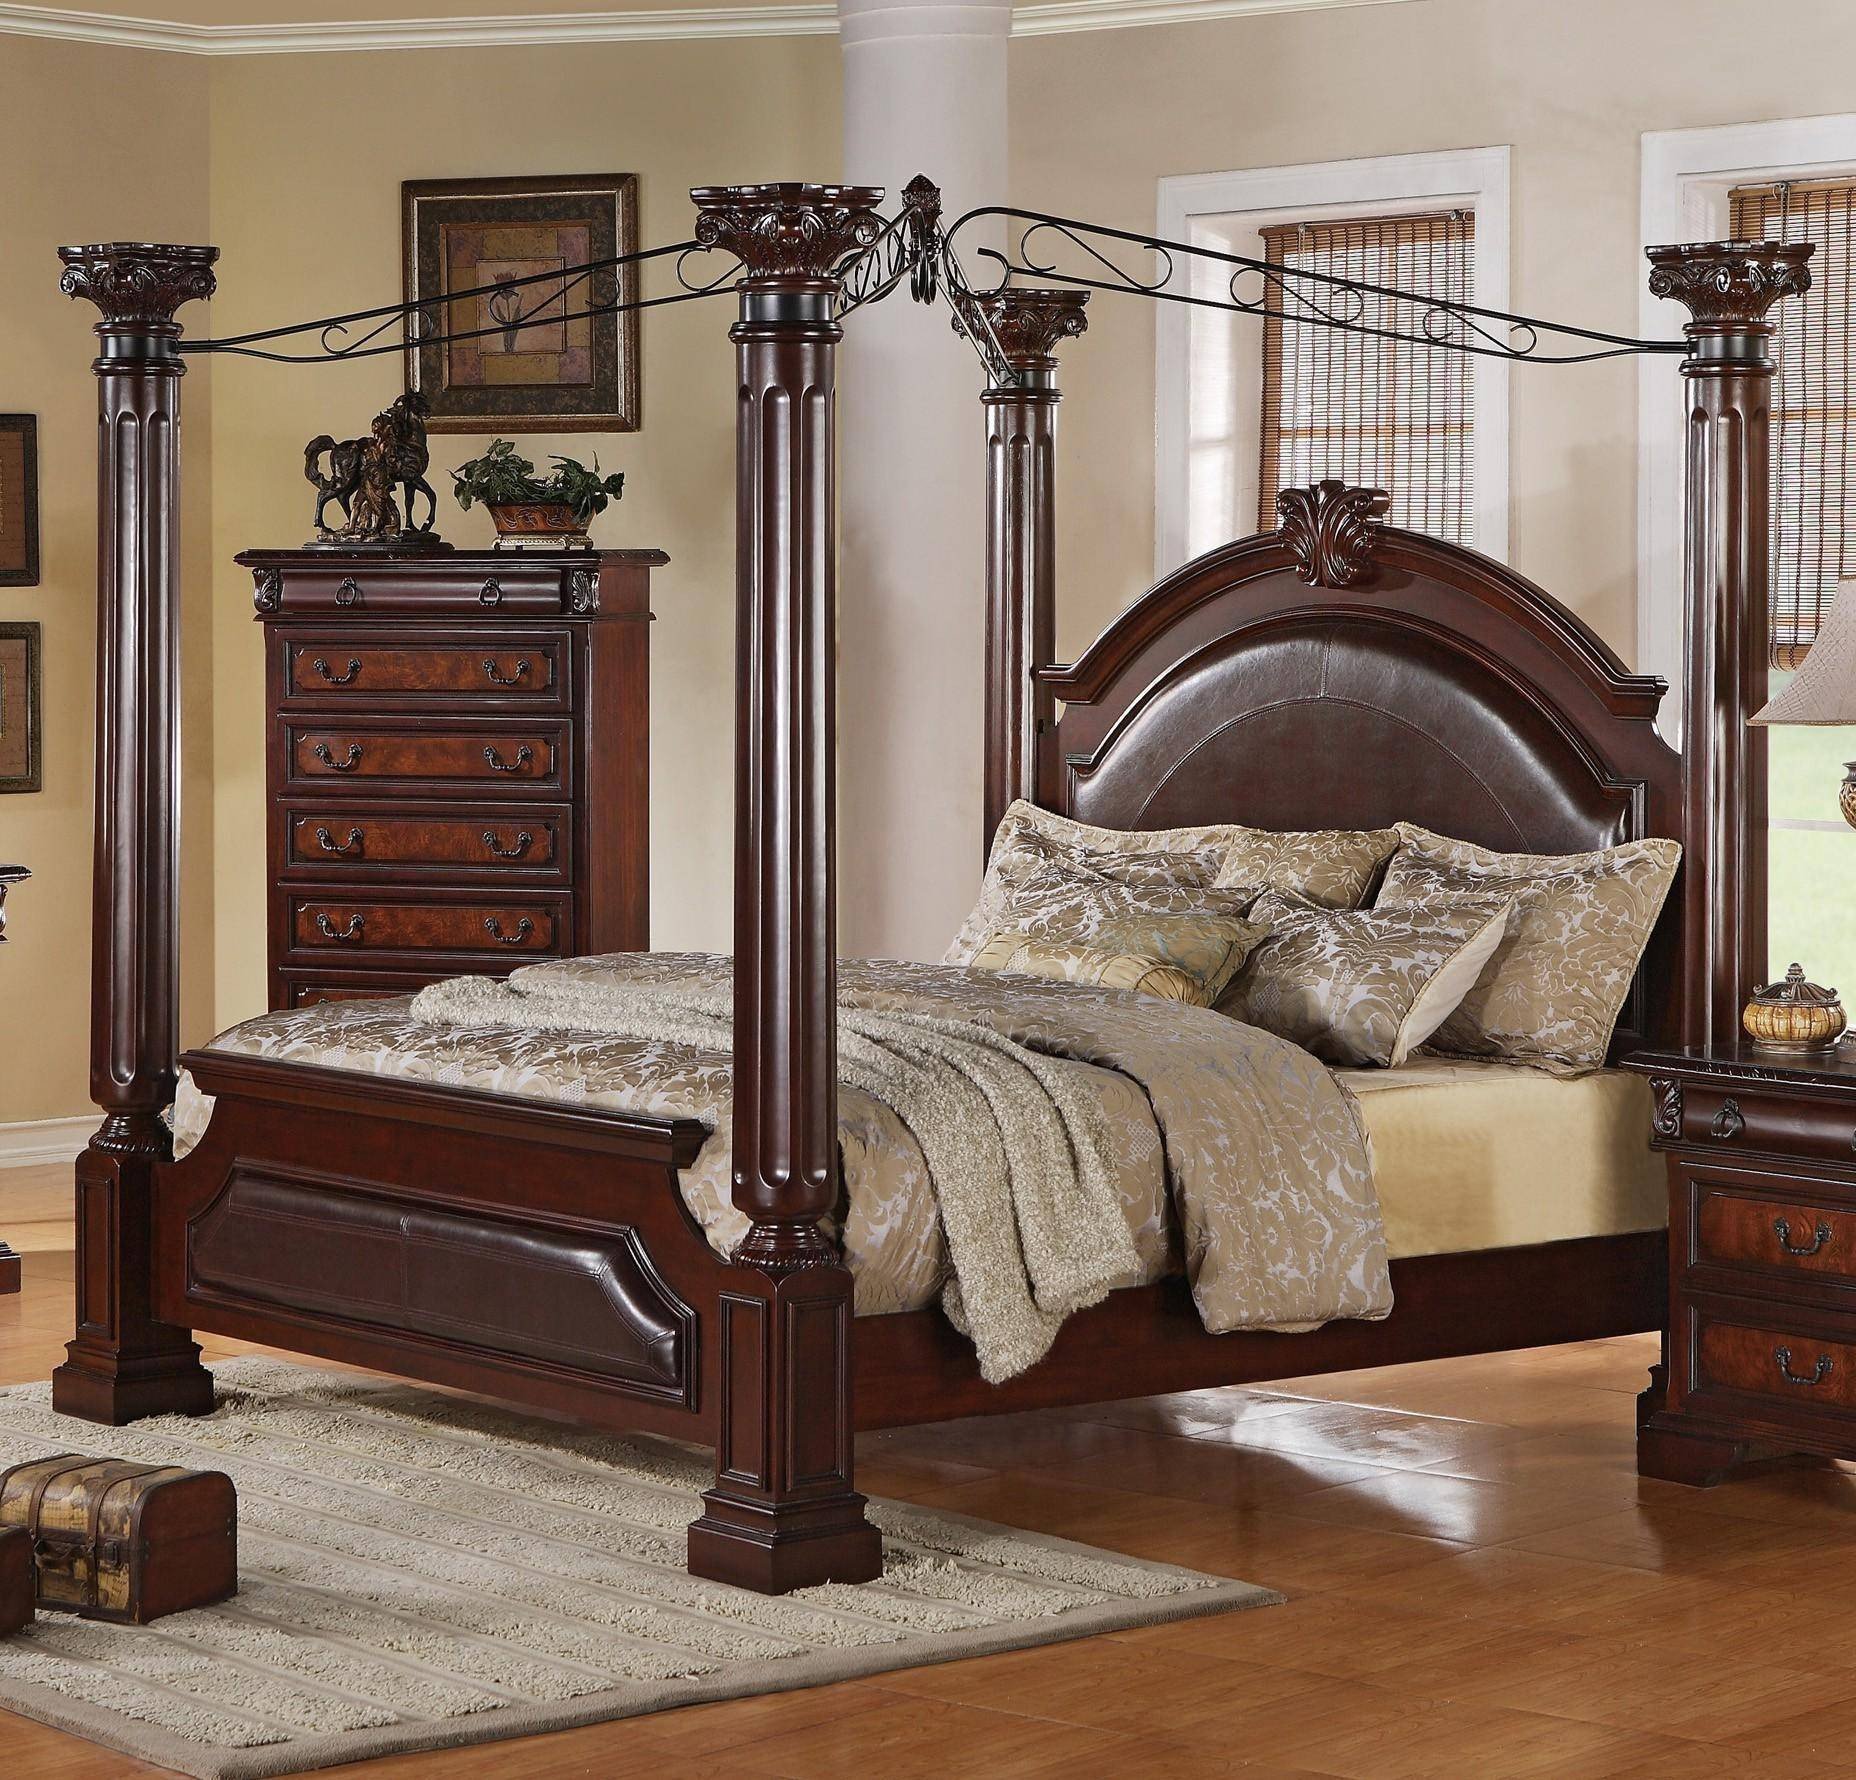 King Size Canopy Bedroom Set Inspirational Neo Renaissance B1470 Q Canopy Bedroom Set In 6 Pieces by